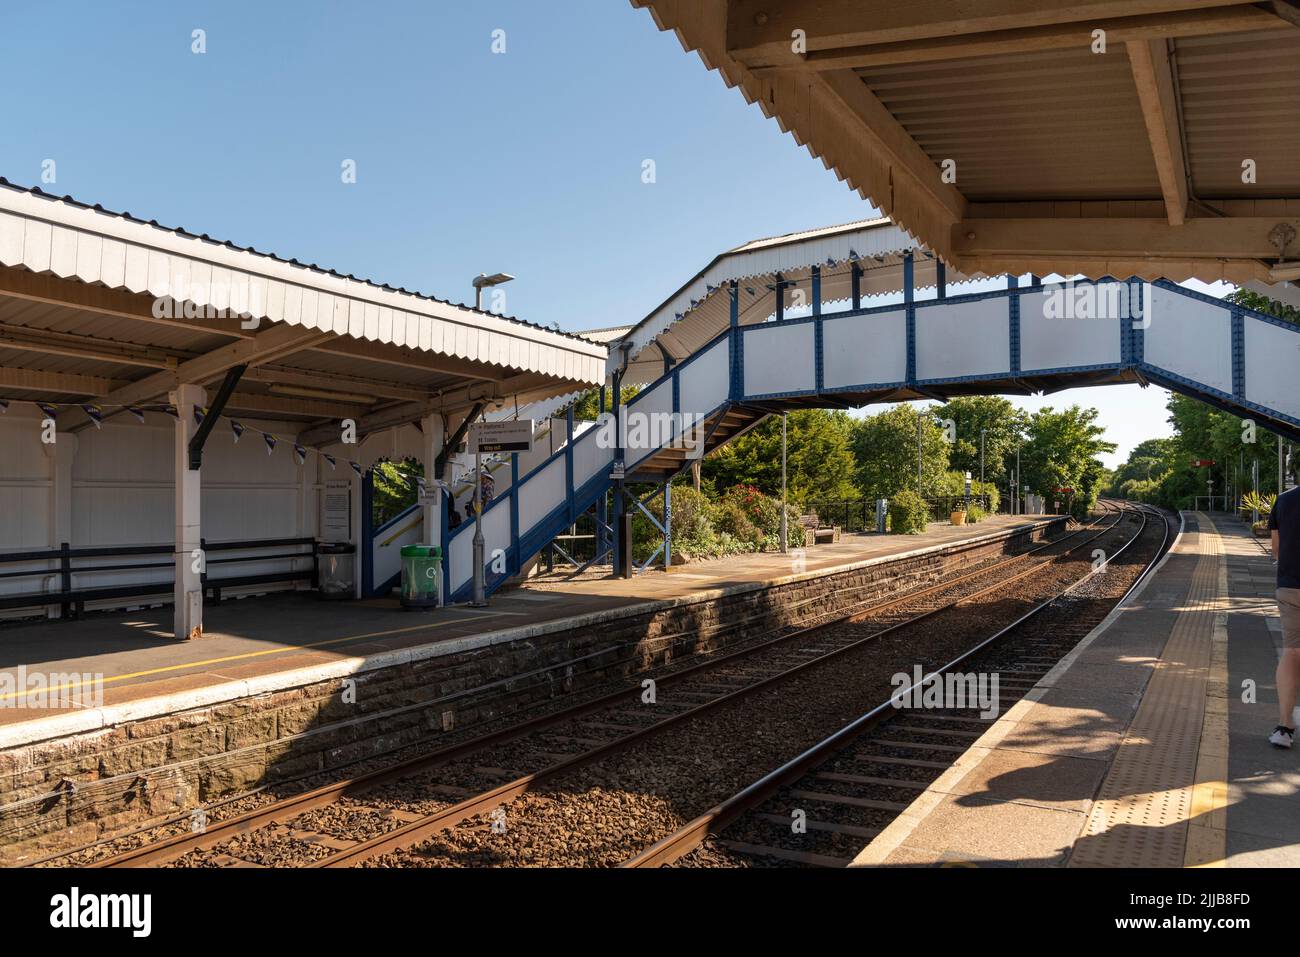 St Erth, Cornwall, England, UK. 2022. St Erth station platforms and footbridge. Change station for the popular coastal branch line to St Ives a holida Stock Photo